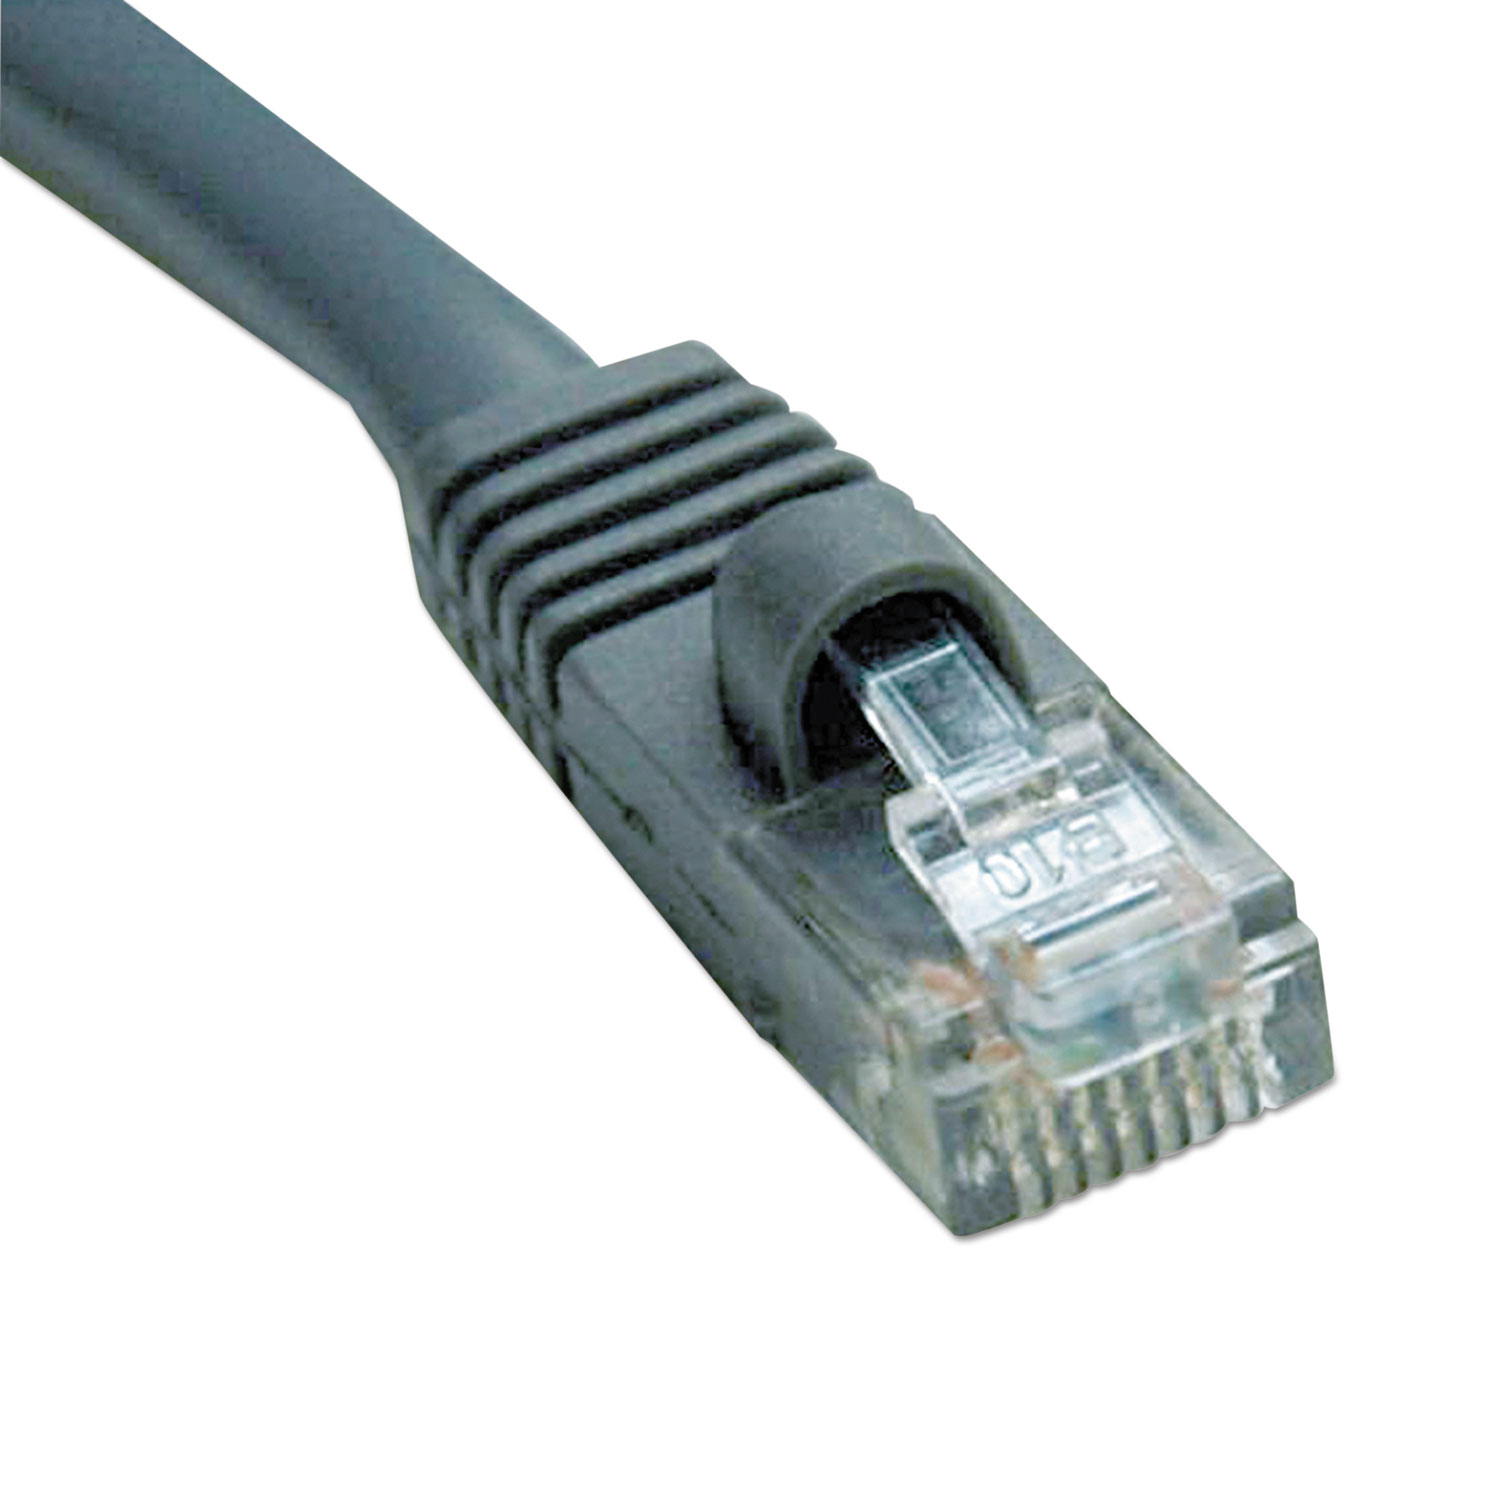 CAT5e Molded Patch Cable, 100 ft., Gray